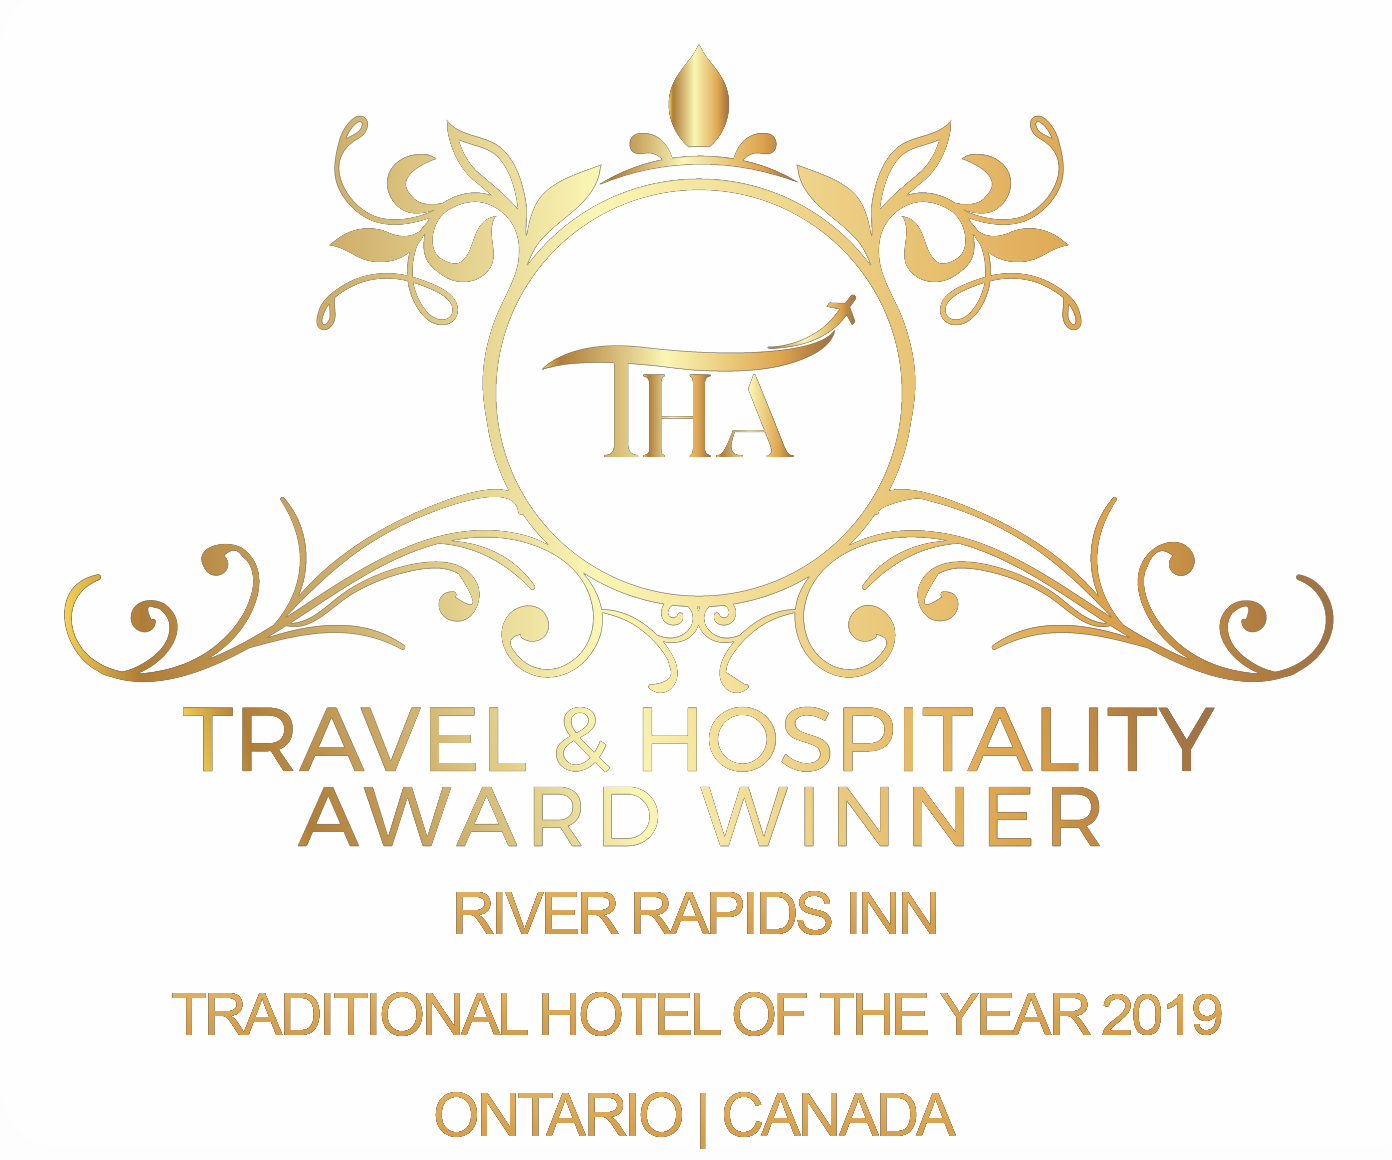 River Rapids 2019 Award Winner for Travel and Hospitality